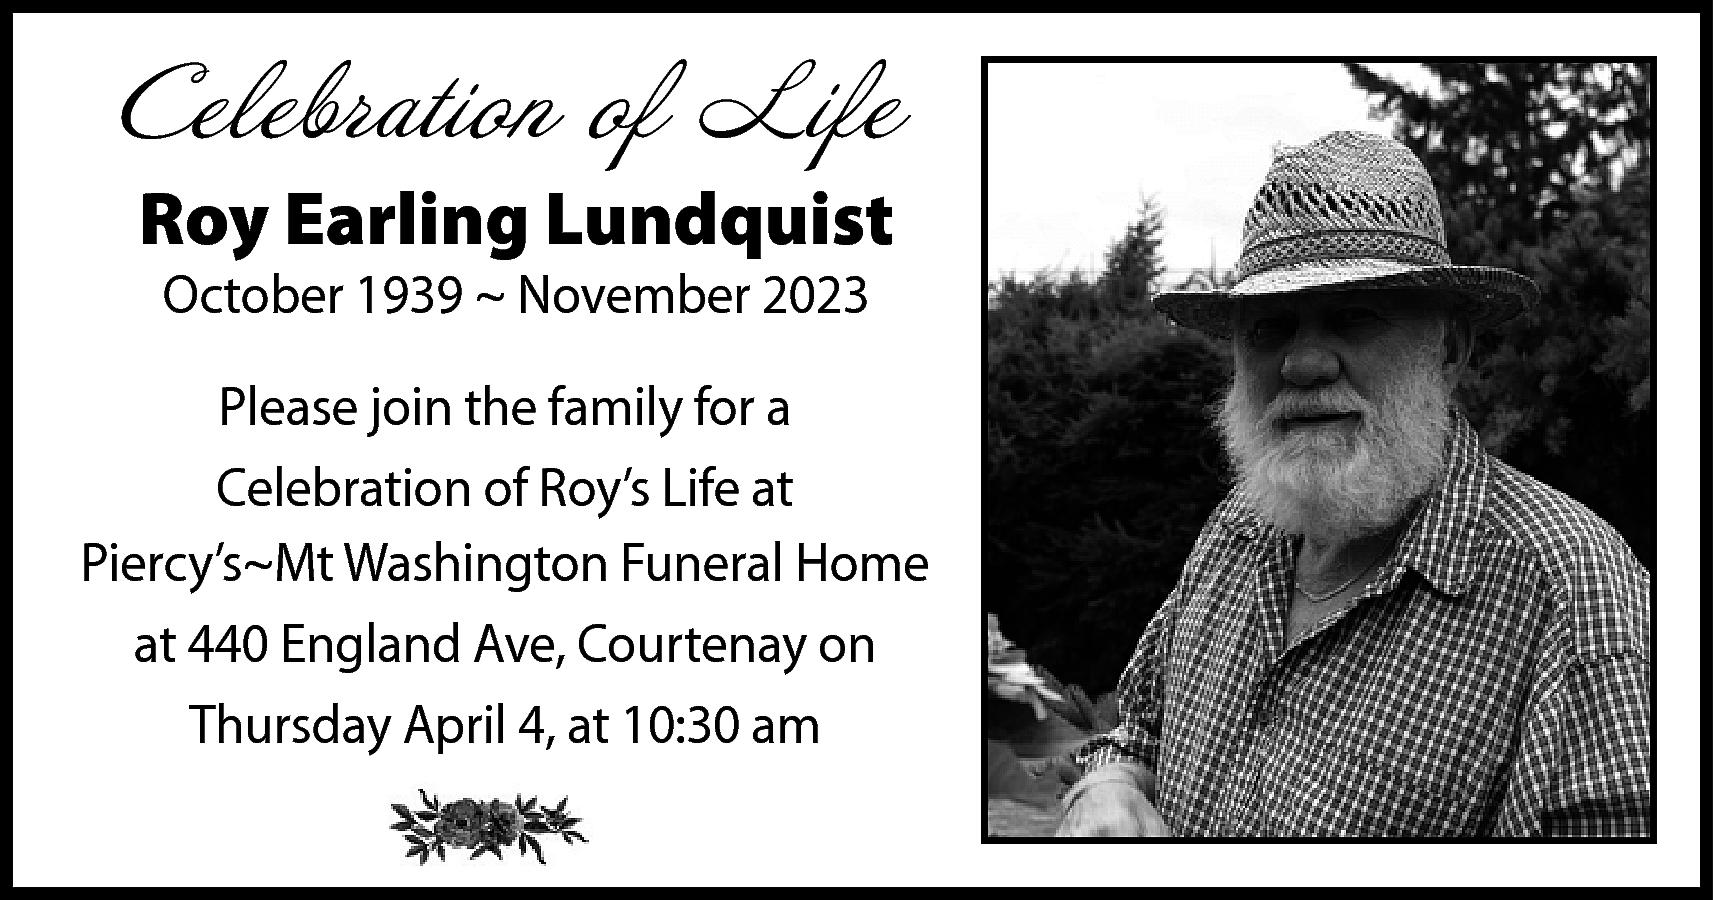 Celebration of Life <br>Roy Earling  Celebration of Life  Roy Earling Lundquist  October 1939 ~ November 2023    Please join the family for a  Celebration of Roy’s Life at  Piercy’s~Mt Washington Funeral Home  at 440 England Ave, Courtenay on  Thursday April 4, at 10:30 am    